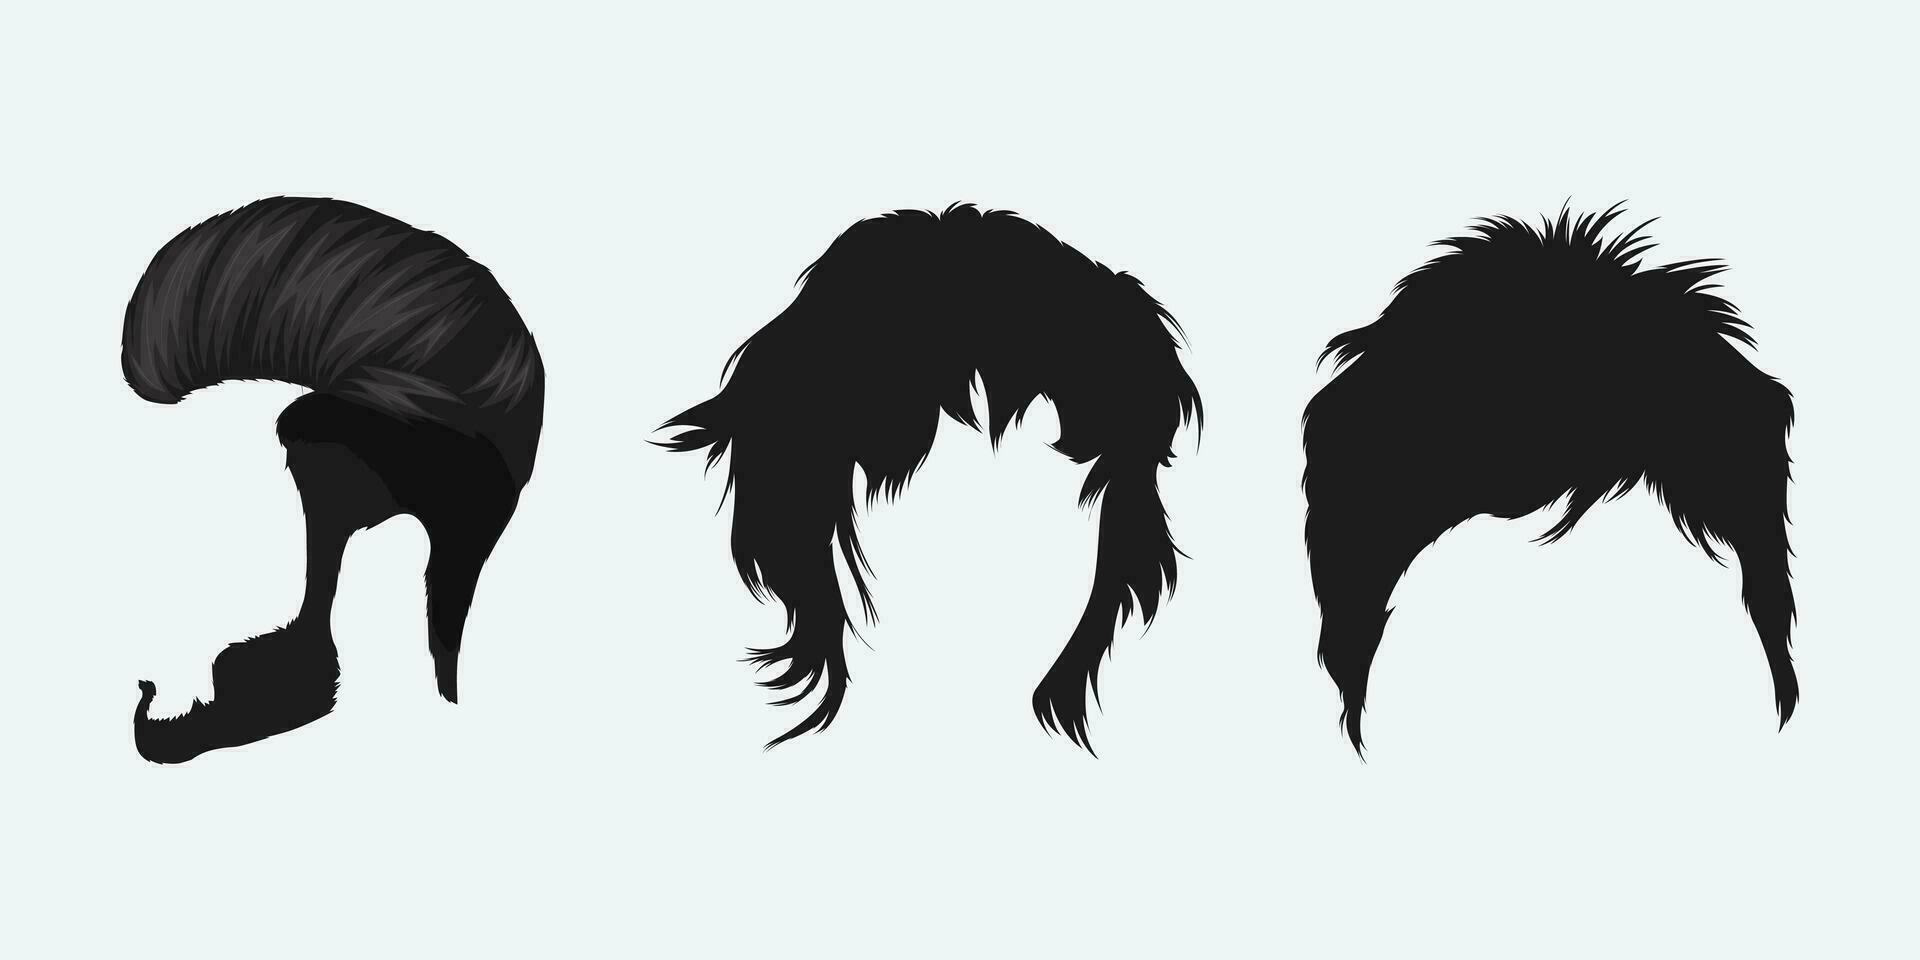 Hair vector elements, hairstyle silhouettes design,